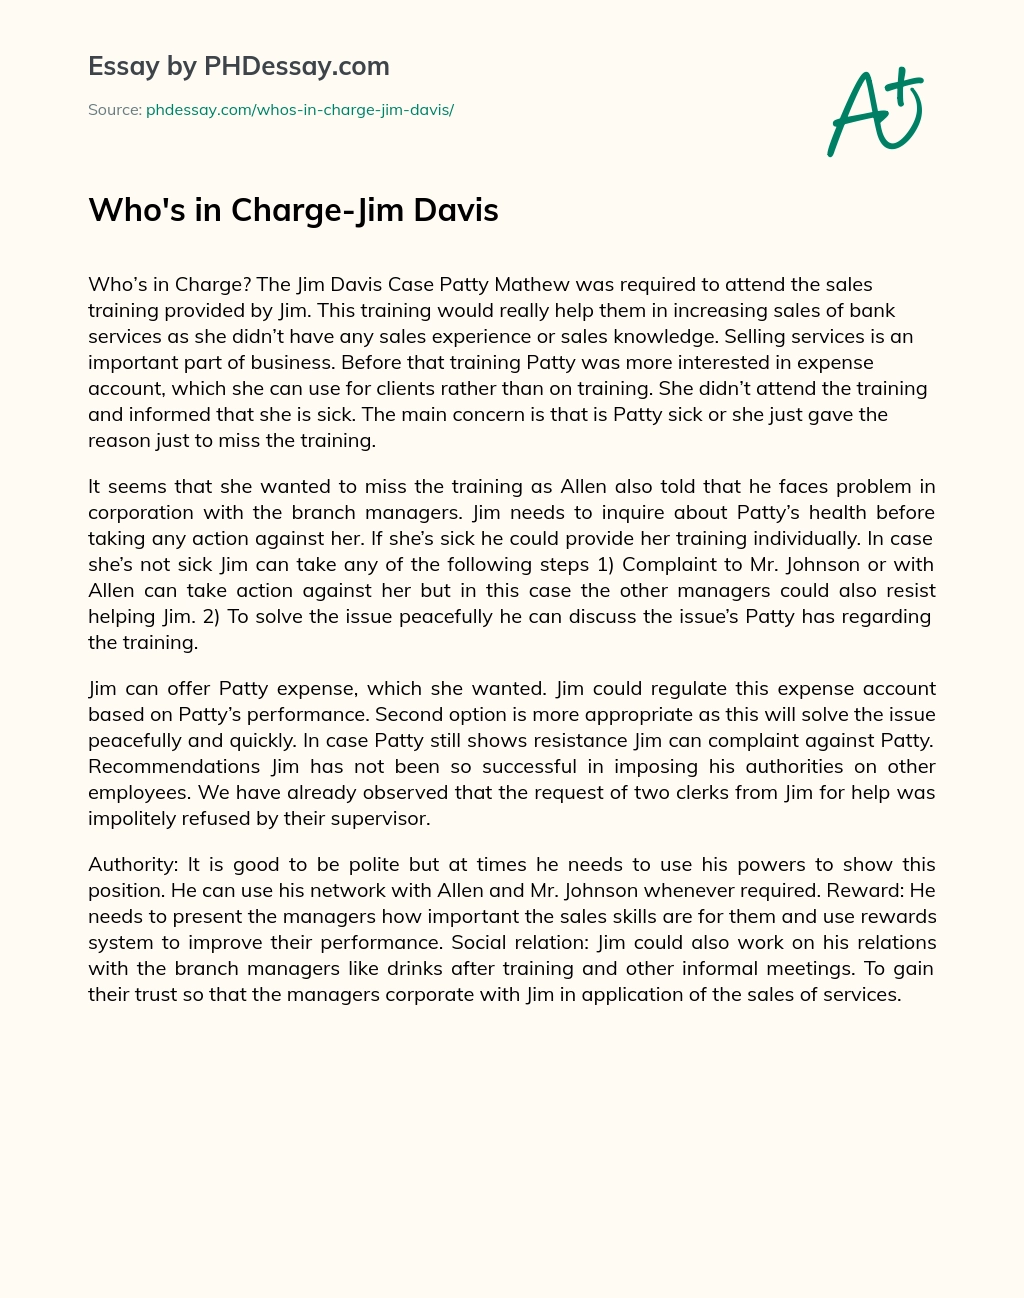 Who’s in Charge-Jim Davis essay